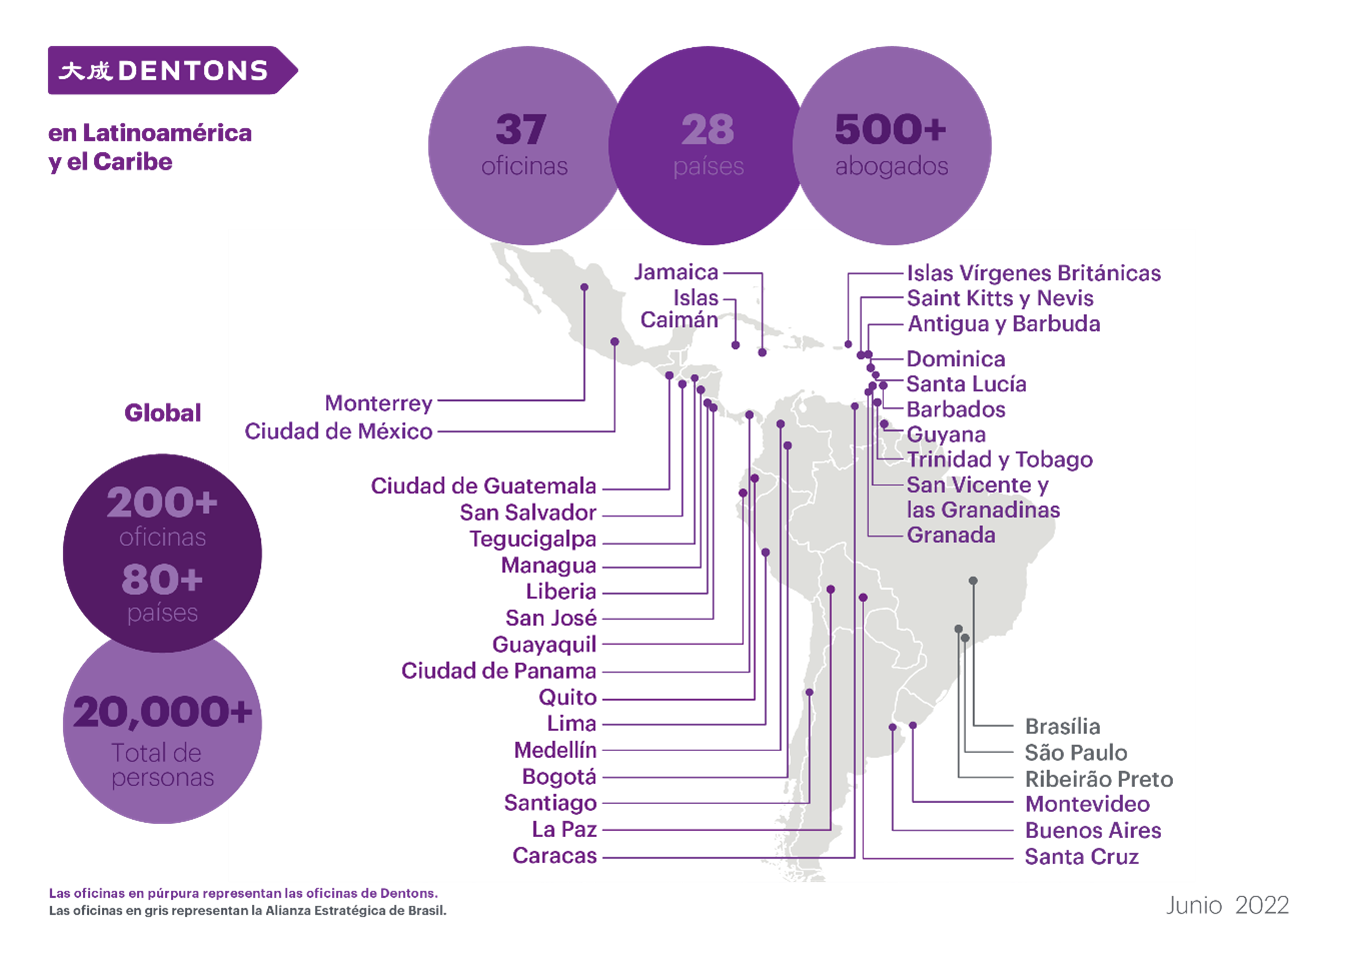 Dentons in Latin America and the Caribbean